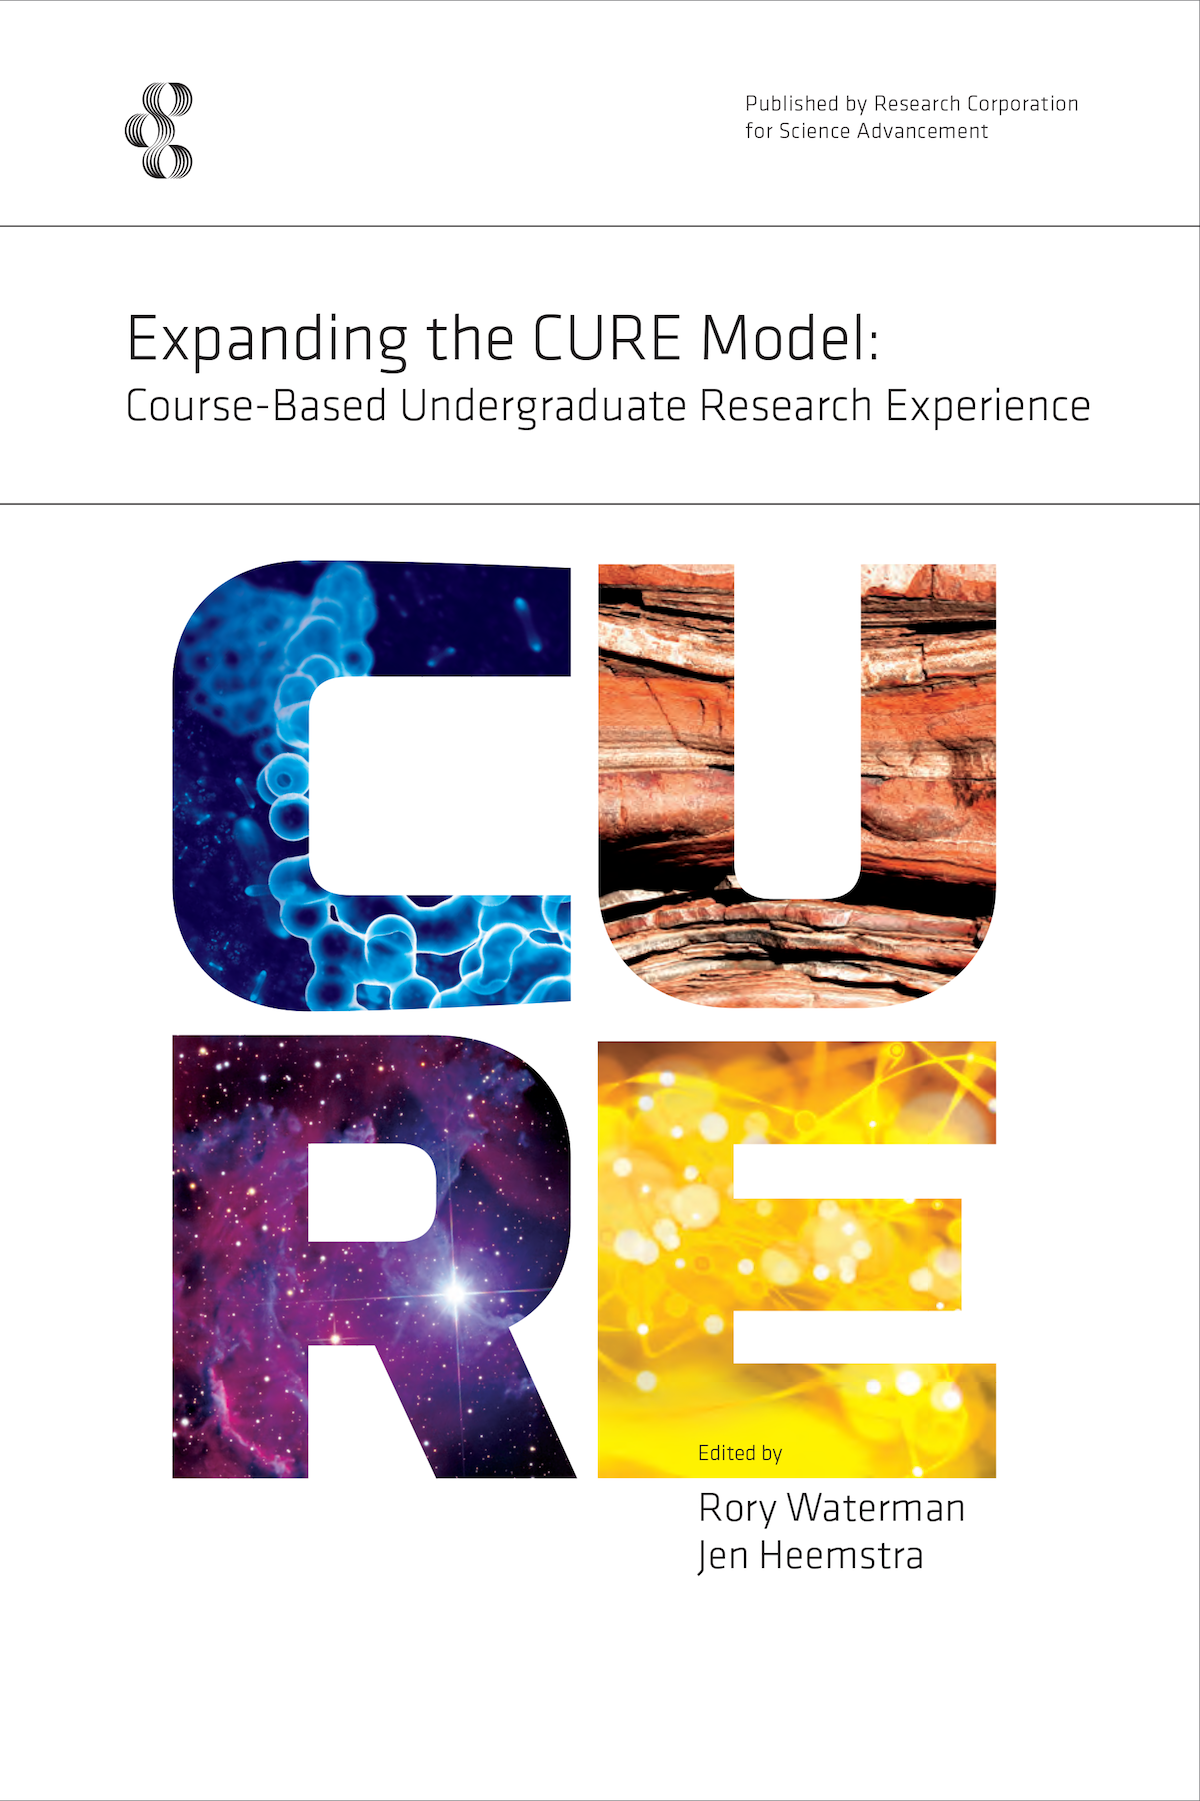 Expanding the CURE Model: Course-based Undergraduate Research Experience